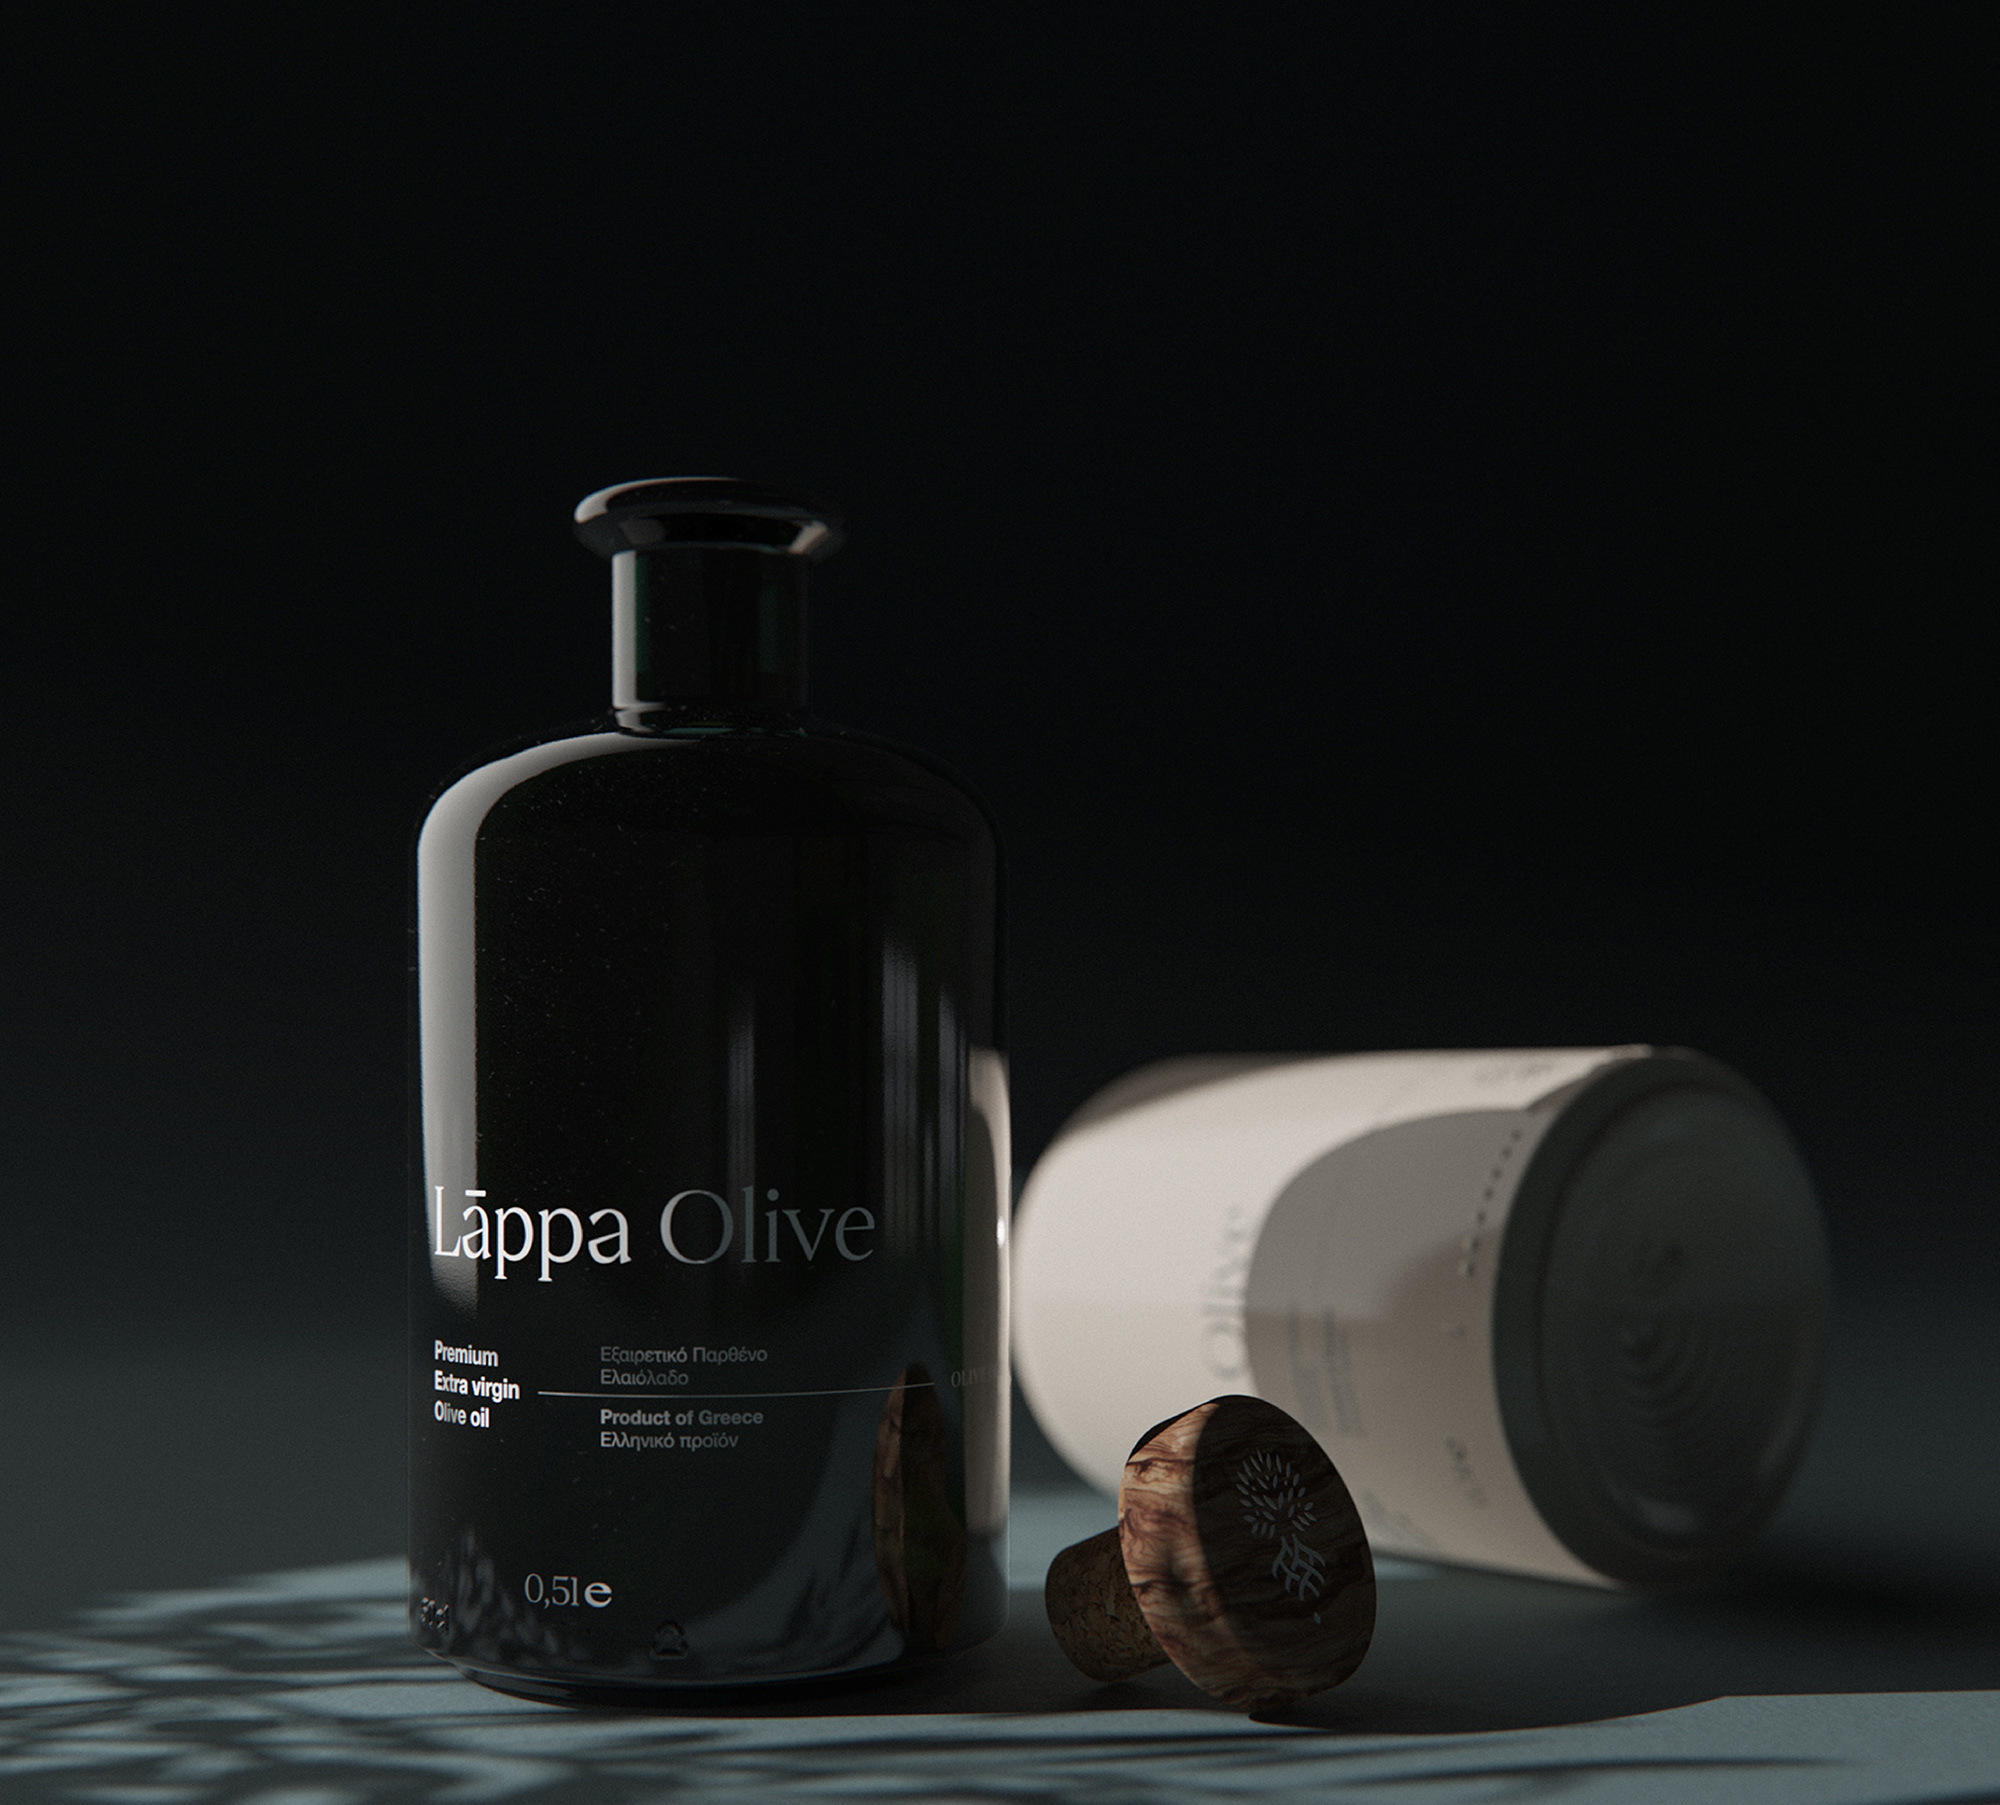 Chic Olive Oil Packaging Design